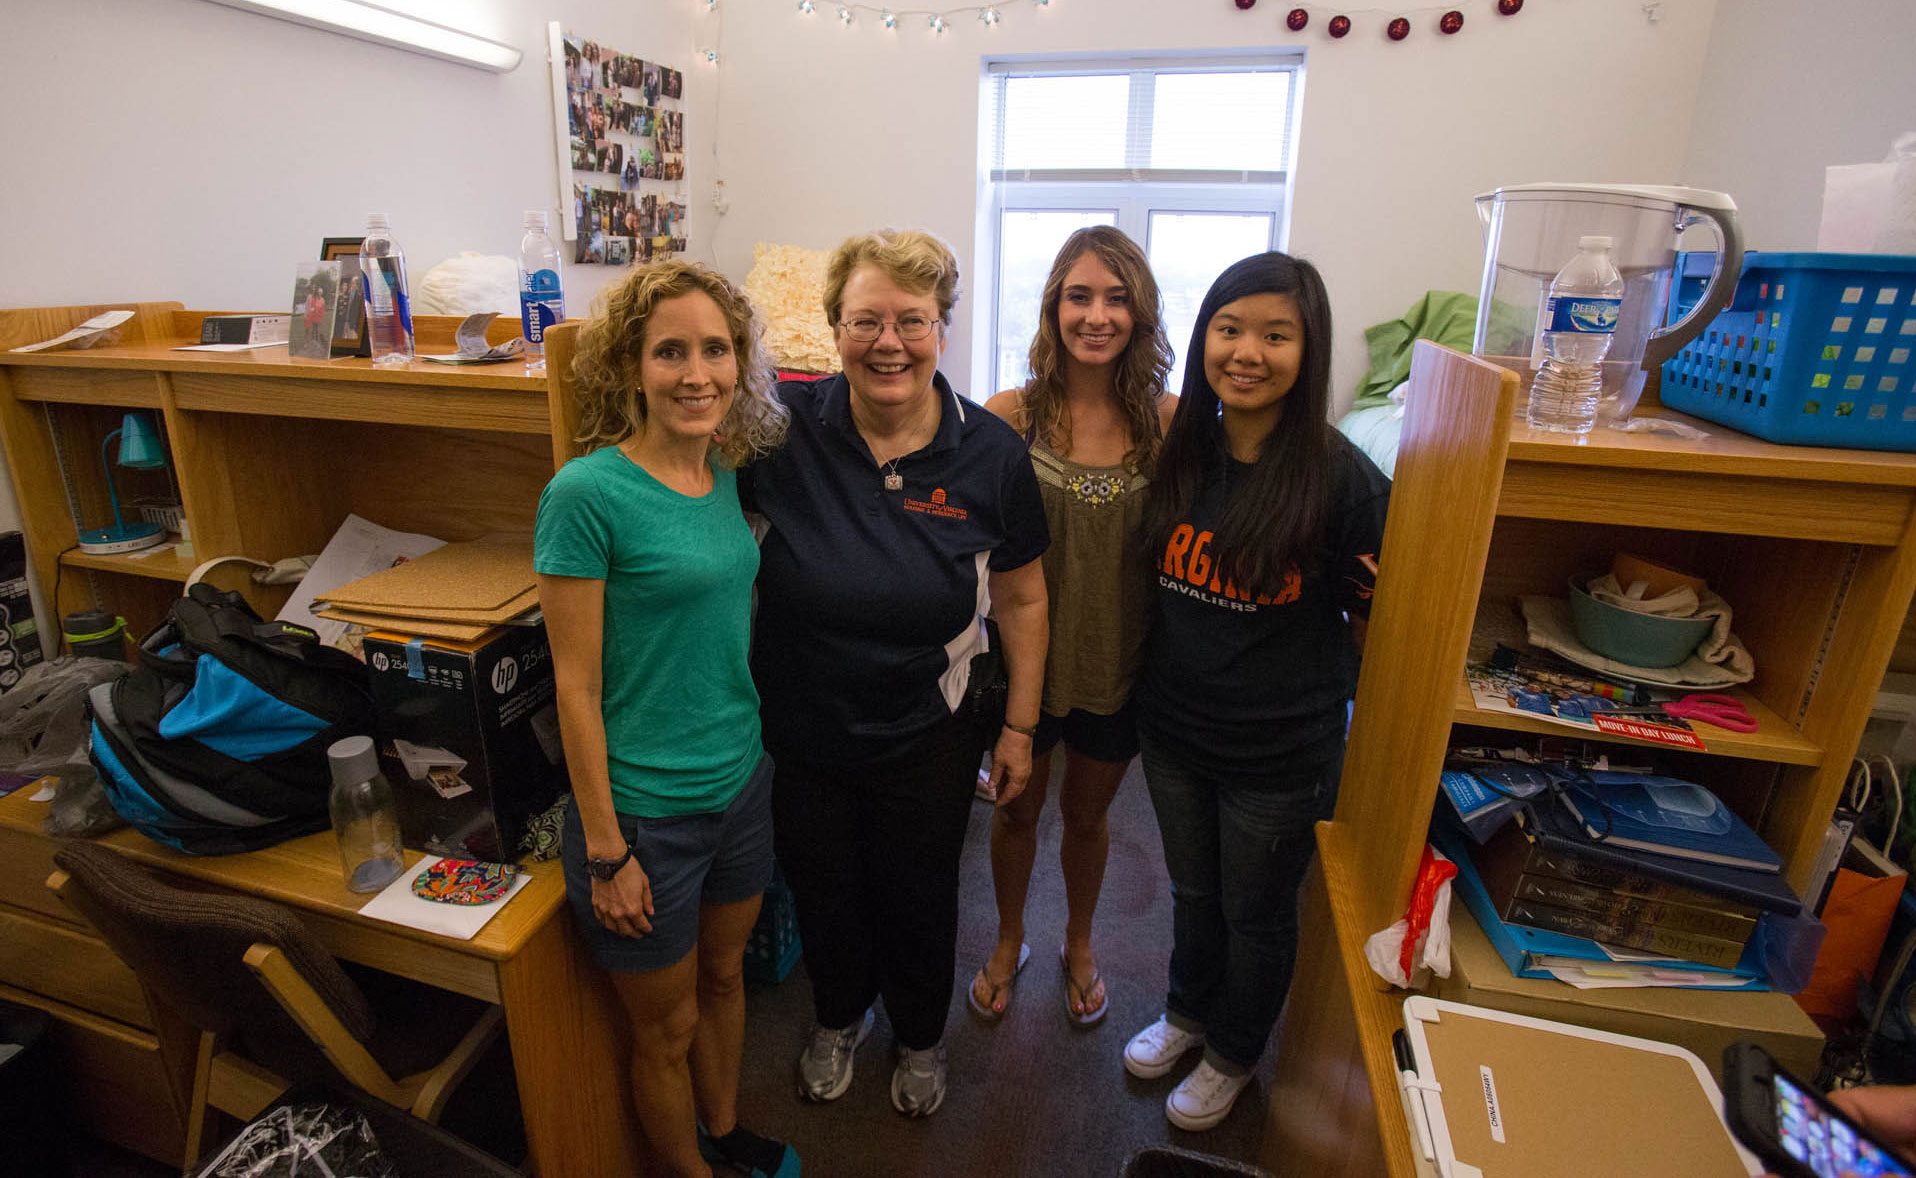 President Sullivan poses with two students and a parent inside of a dorm room